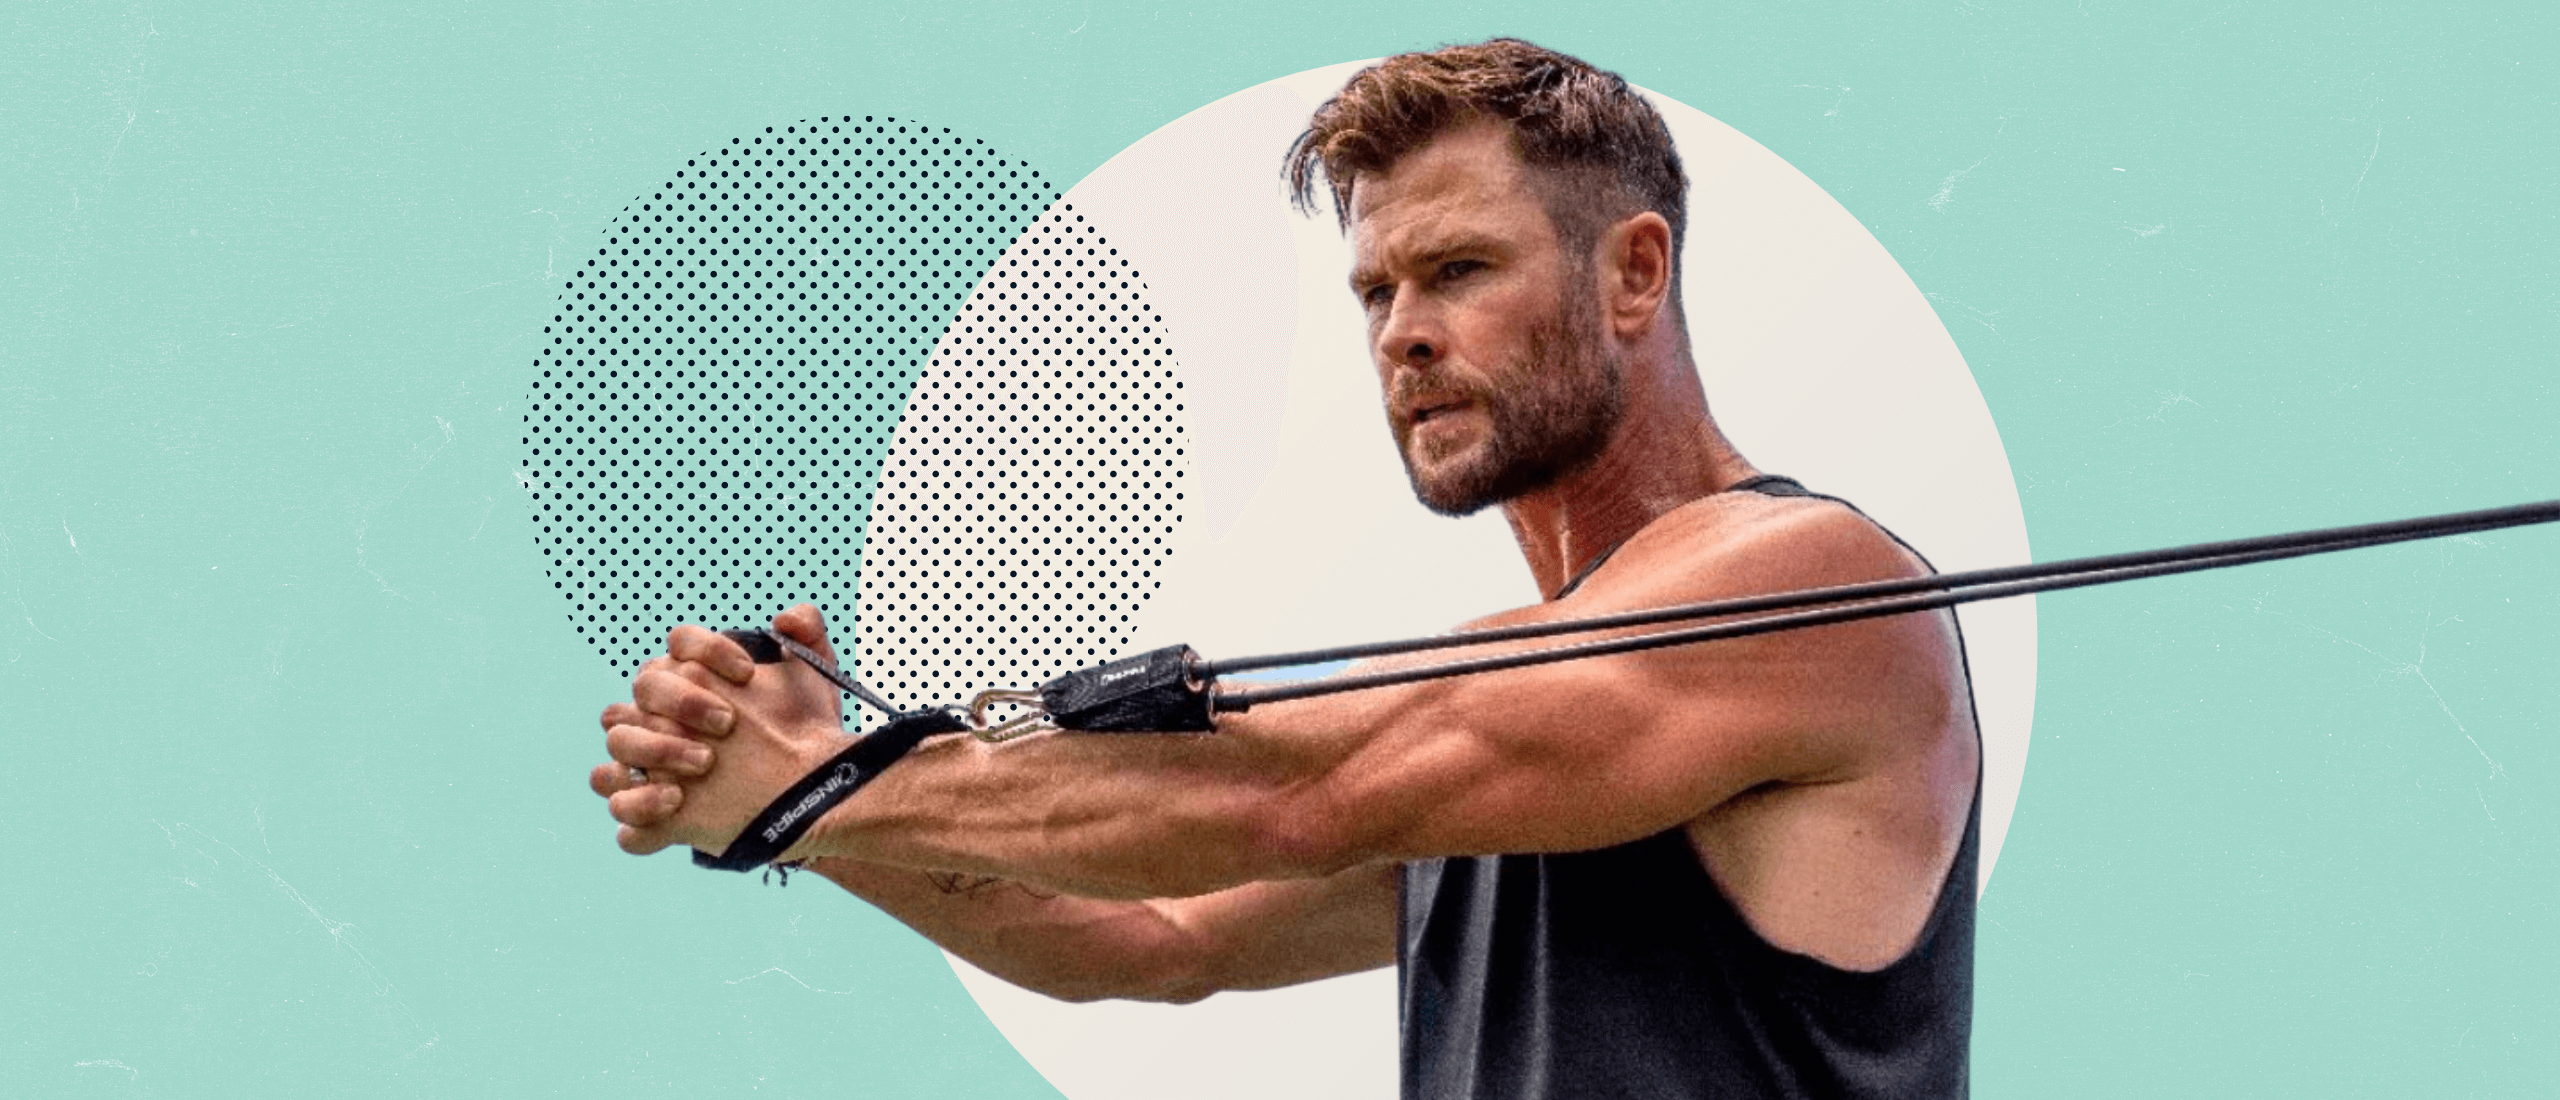 Chris Hemsworth using a cable to do standing rotational core work